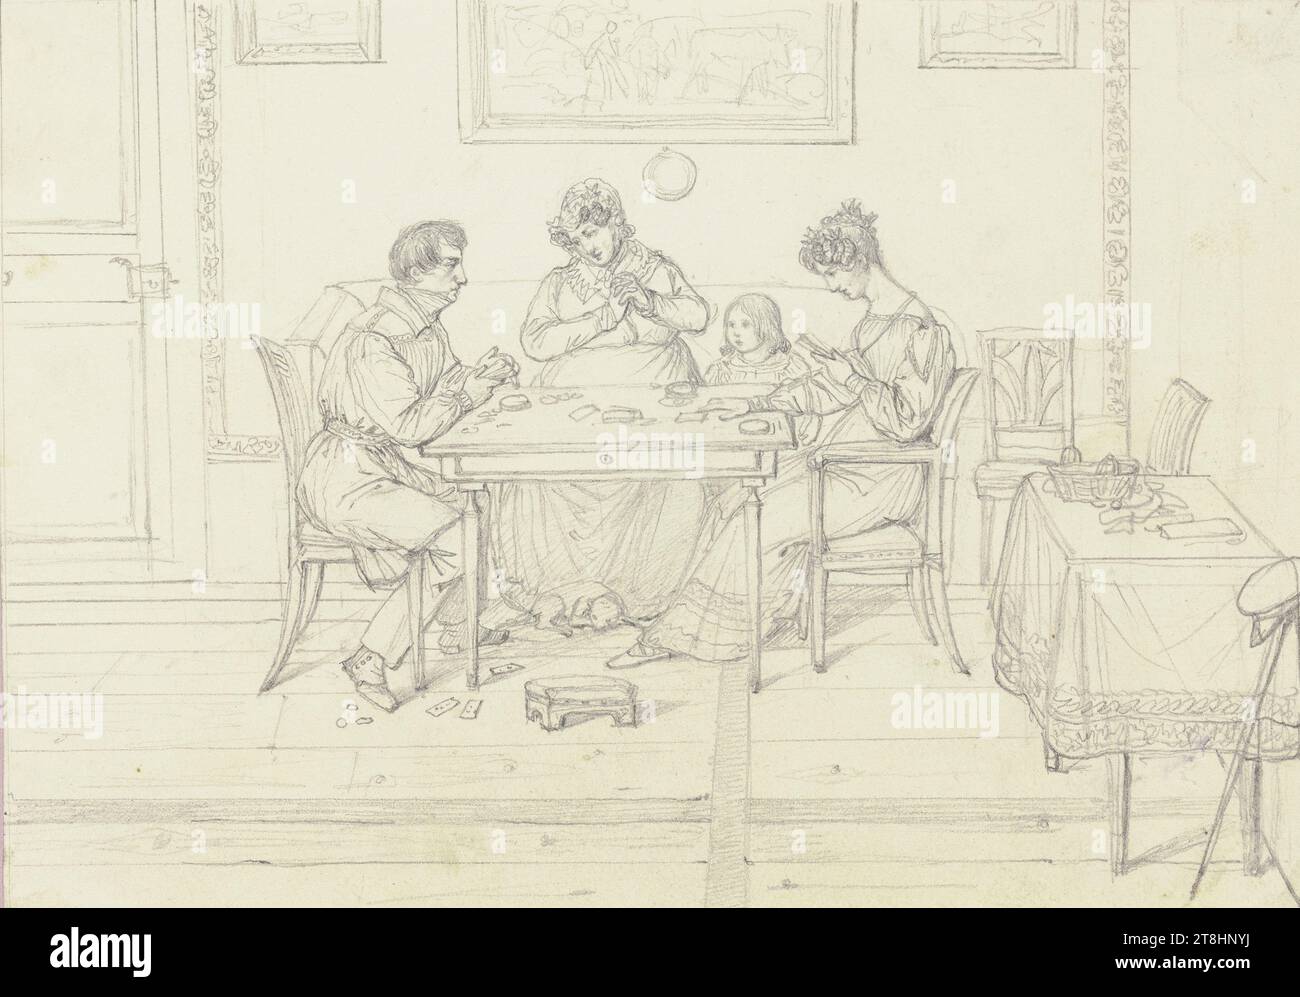 FRIEDRICH MOOSBRUGGER, family playing cards, sheet, 109 x 155 mm, pencil on vellum paper, family playing cards, FRIEDRICH MOOSBRUGGER, page, adhesive album of Marie Auguste Emilie Freiin von Günderrode, page 49, part number / total, 1 / 2, 19TH CENTURY, DRAWING, pencil on vellum paper, GRAPHITE-CLAY MIXTURE, VELVET PAPER, PENCIL DRAWING, GERMAN, FIGURE STUDY, COMPOSITION STUDY, Not labeled Stock Photo